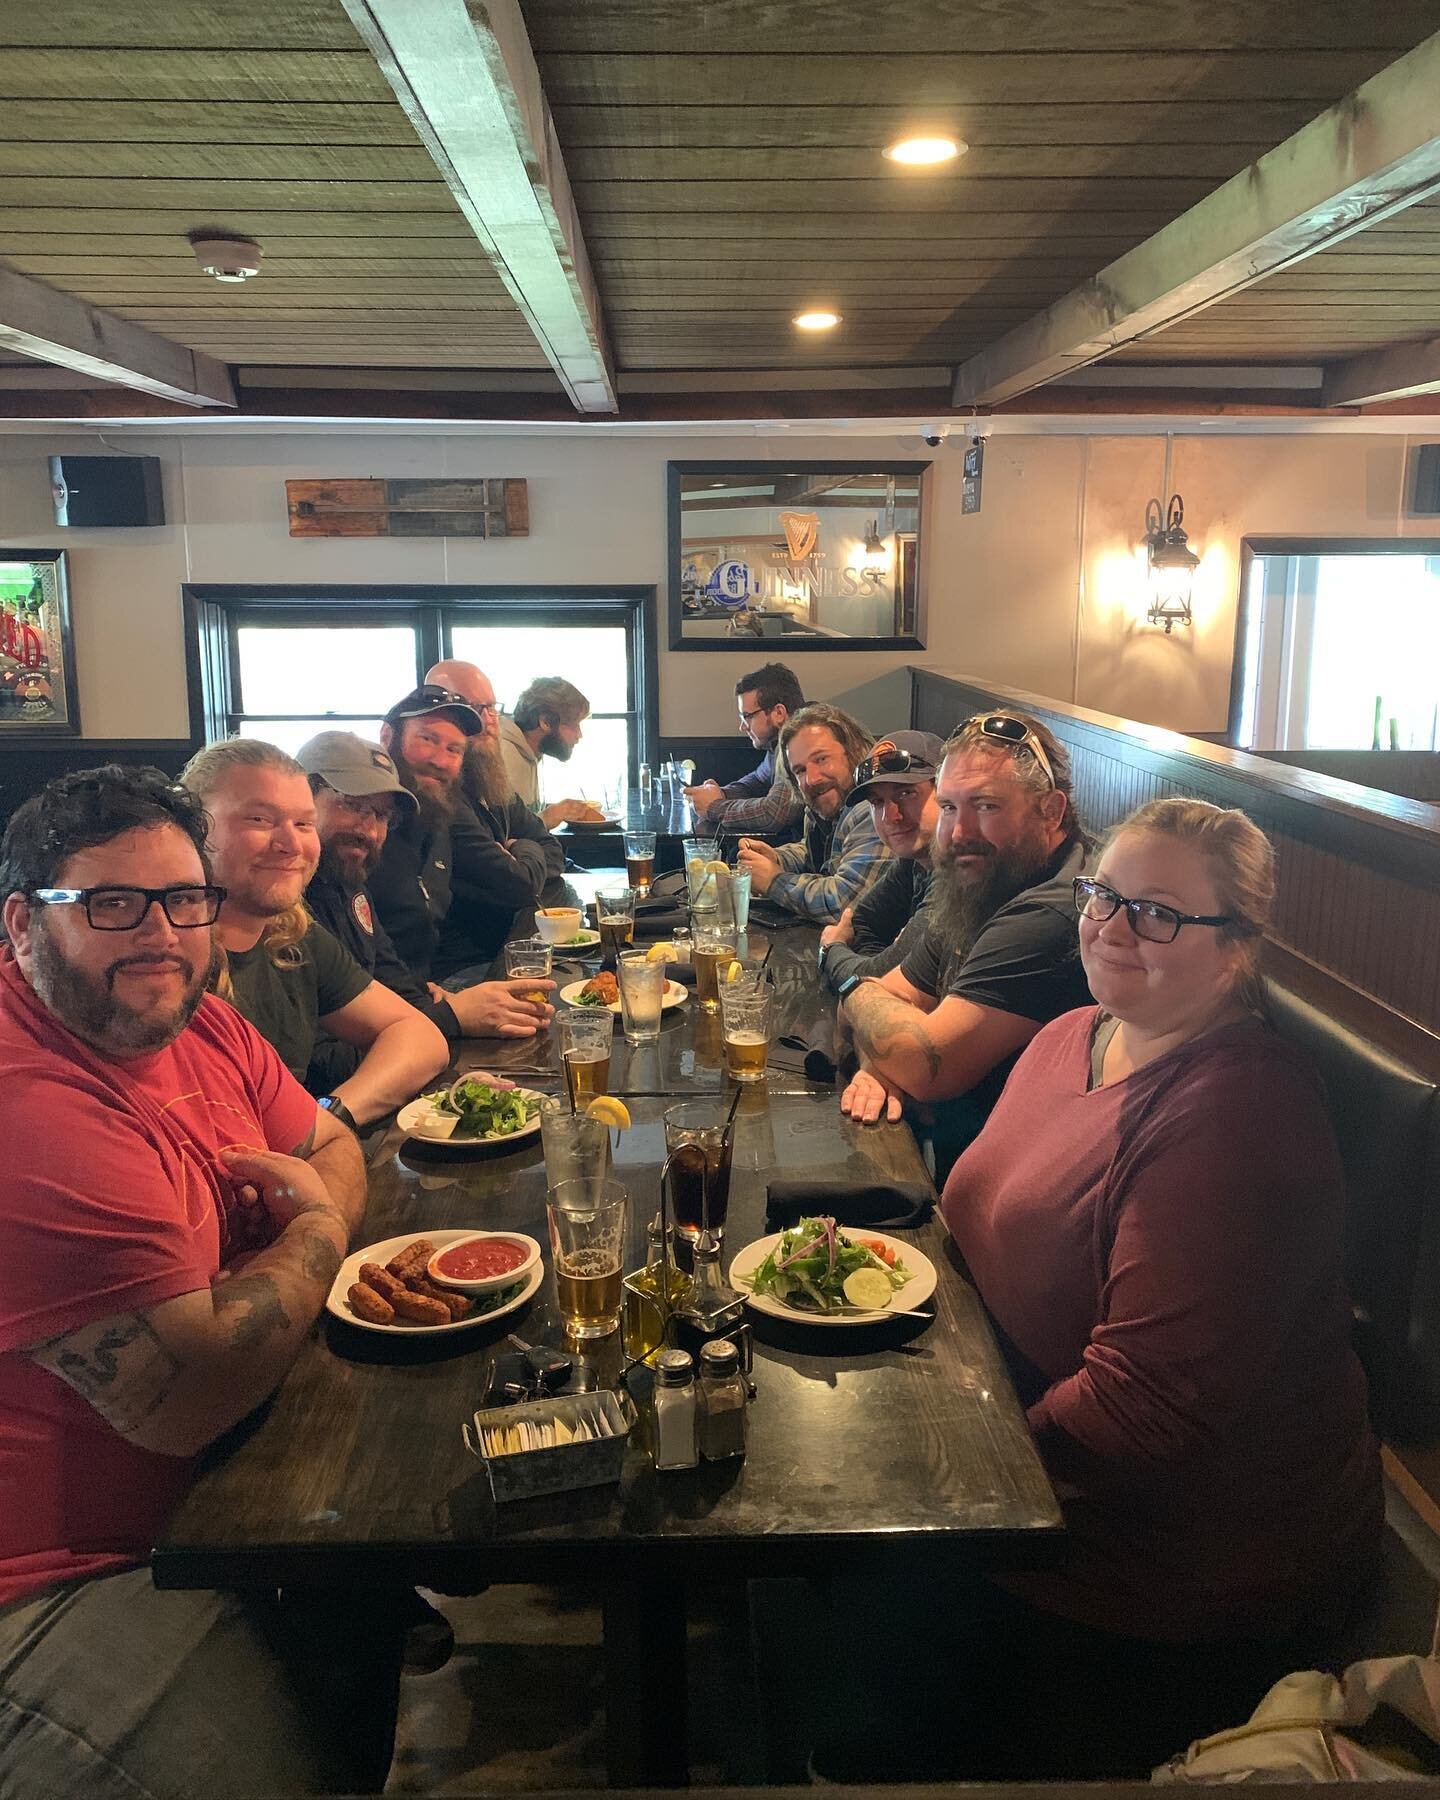 Some sore shoulders today but we had a blast yesterday! The Black Walnut Team (minus a few who couldn&rsquo;t make it) got together for a company clay bird shoot and lunch. #workhardplayhard #teamworkmakesthedreamwork #blackwalnutproductions